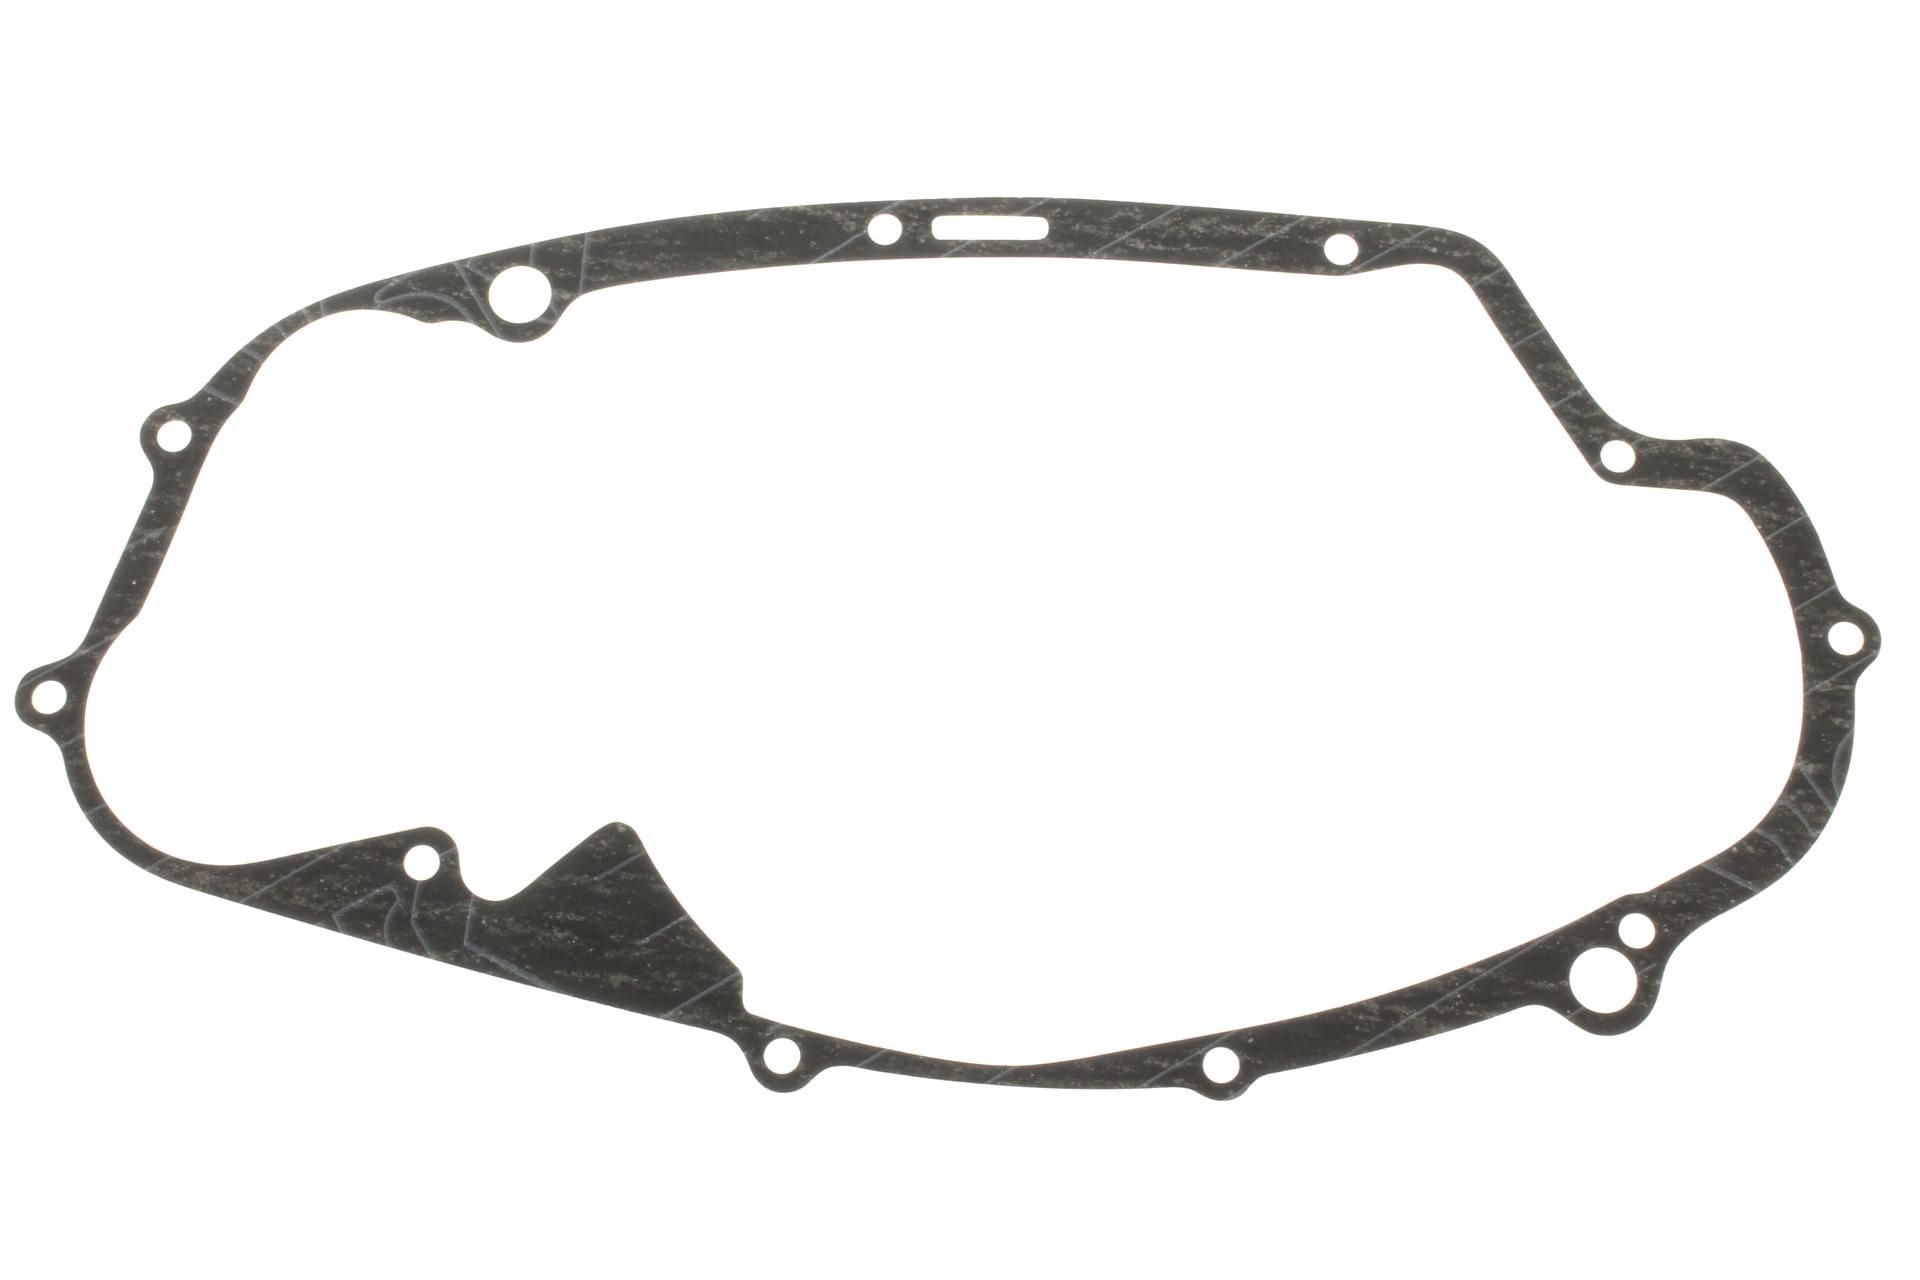 1M1-15461-01-00 CRANKCASE COVER GASKET